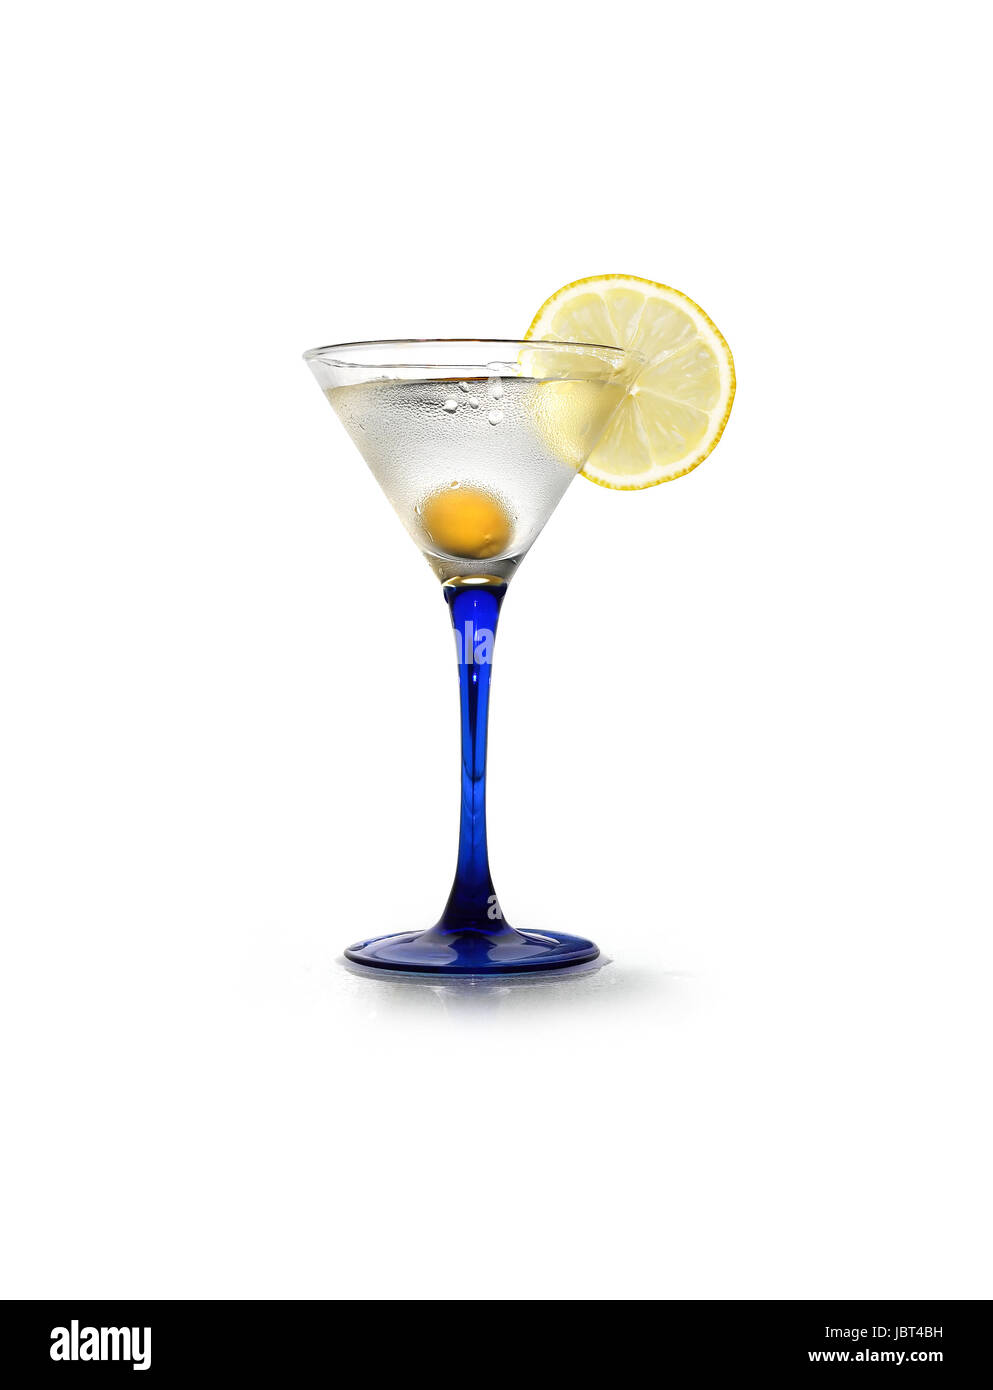 Stylish martini glass with lemon and olive on white background. Isolated with clipping path Stock Photo